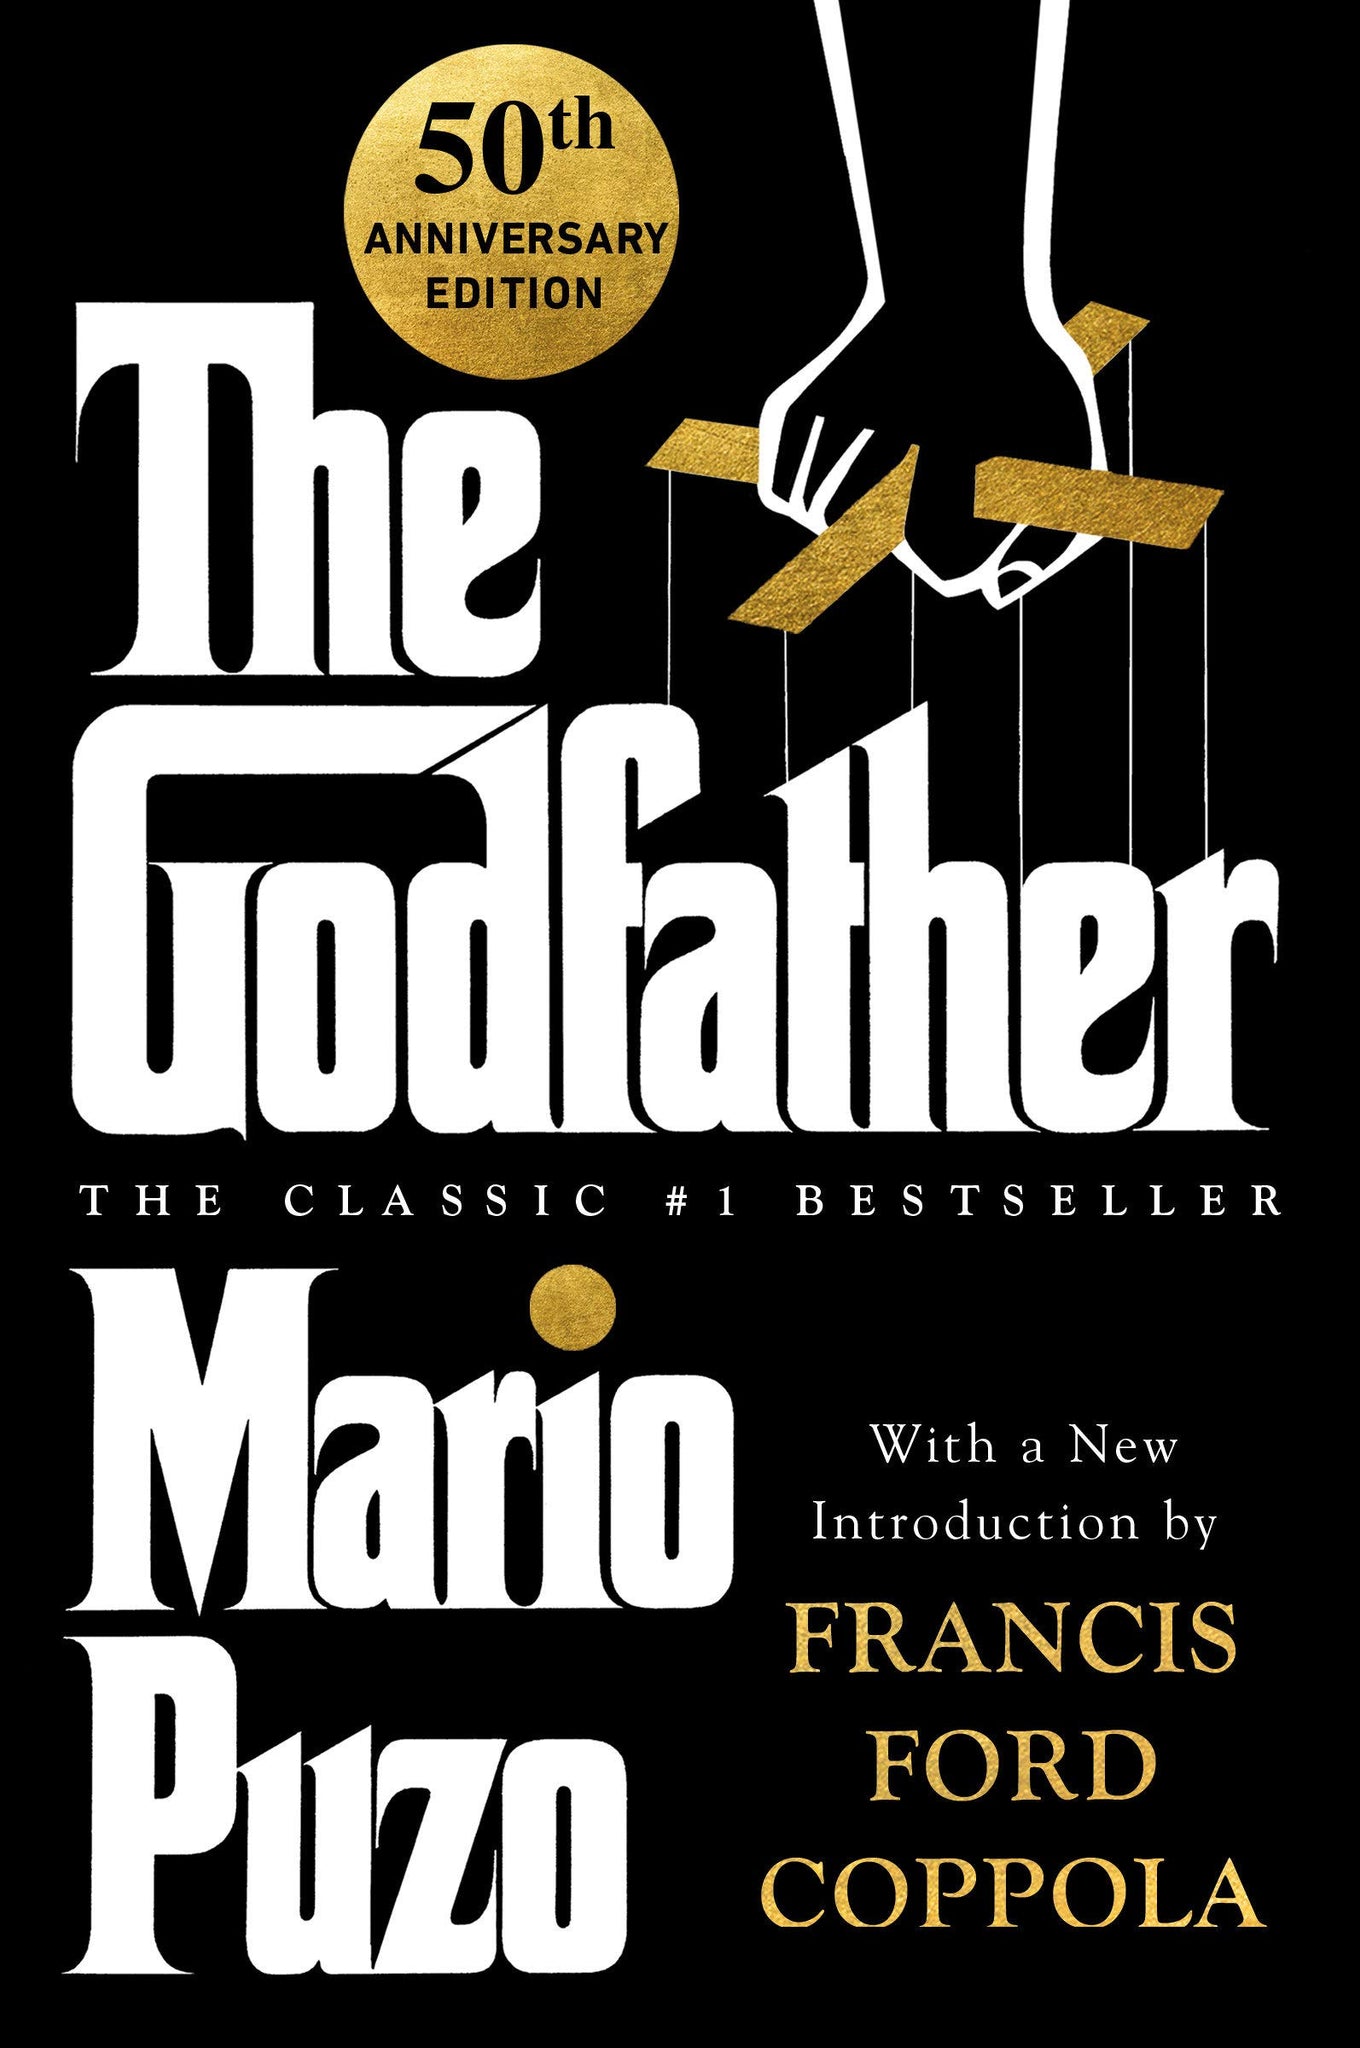 The Godfather : 50th Anniversary Edition by Mario Puzo